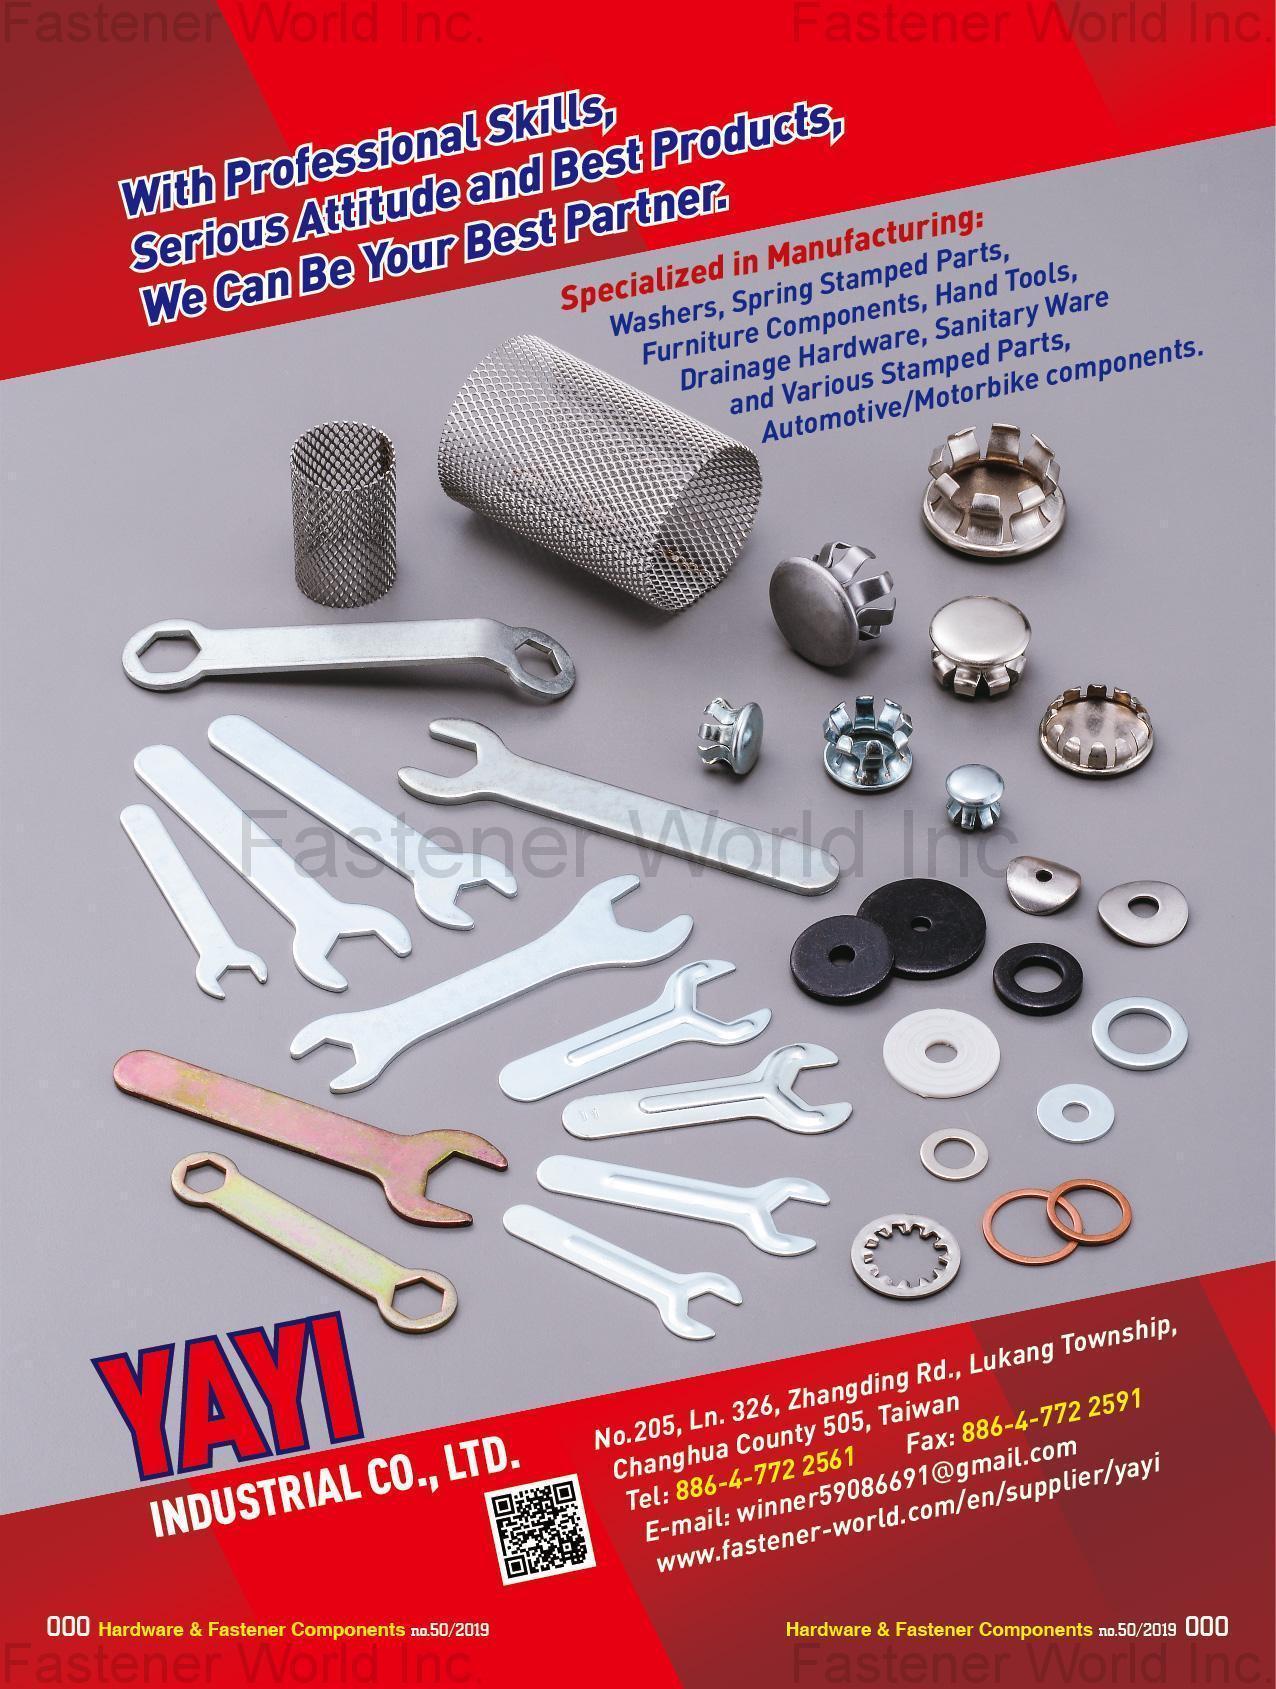 YAYI INDUSTRIAL CO., LTD. , Washers,Spring Stamped Parts,Furniture Components,Hand Tools,Drainage Hardware,Sanitary Ware,Stamped Parts,Automotive Components,Motorbike Components